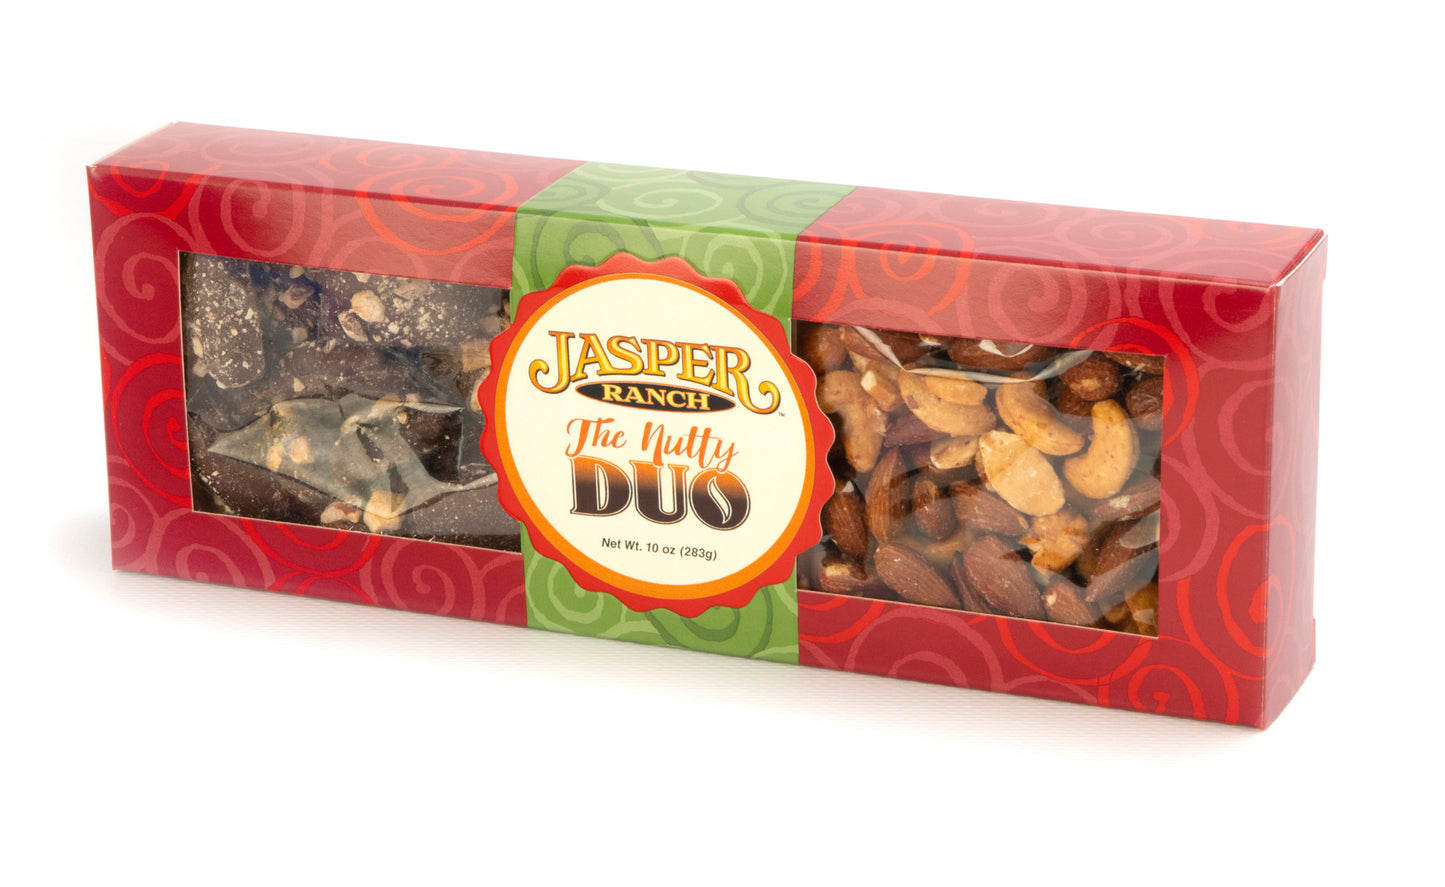 Nutty Duo, English Toffee & Maple Mixed Nuts